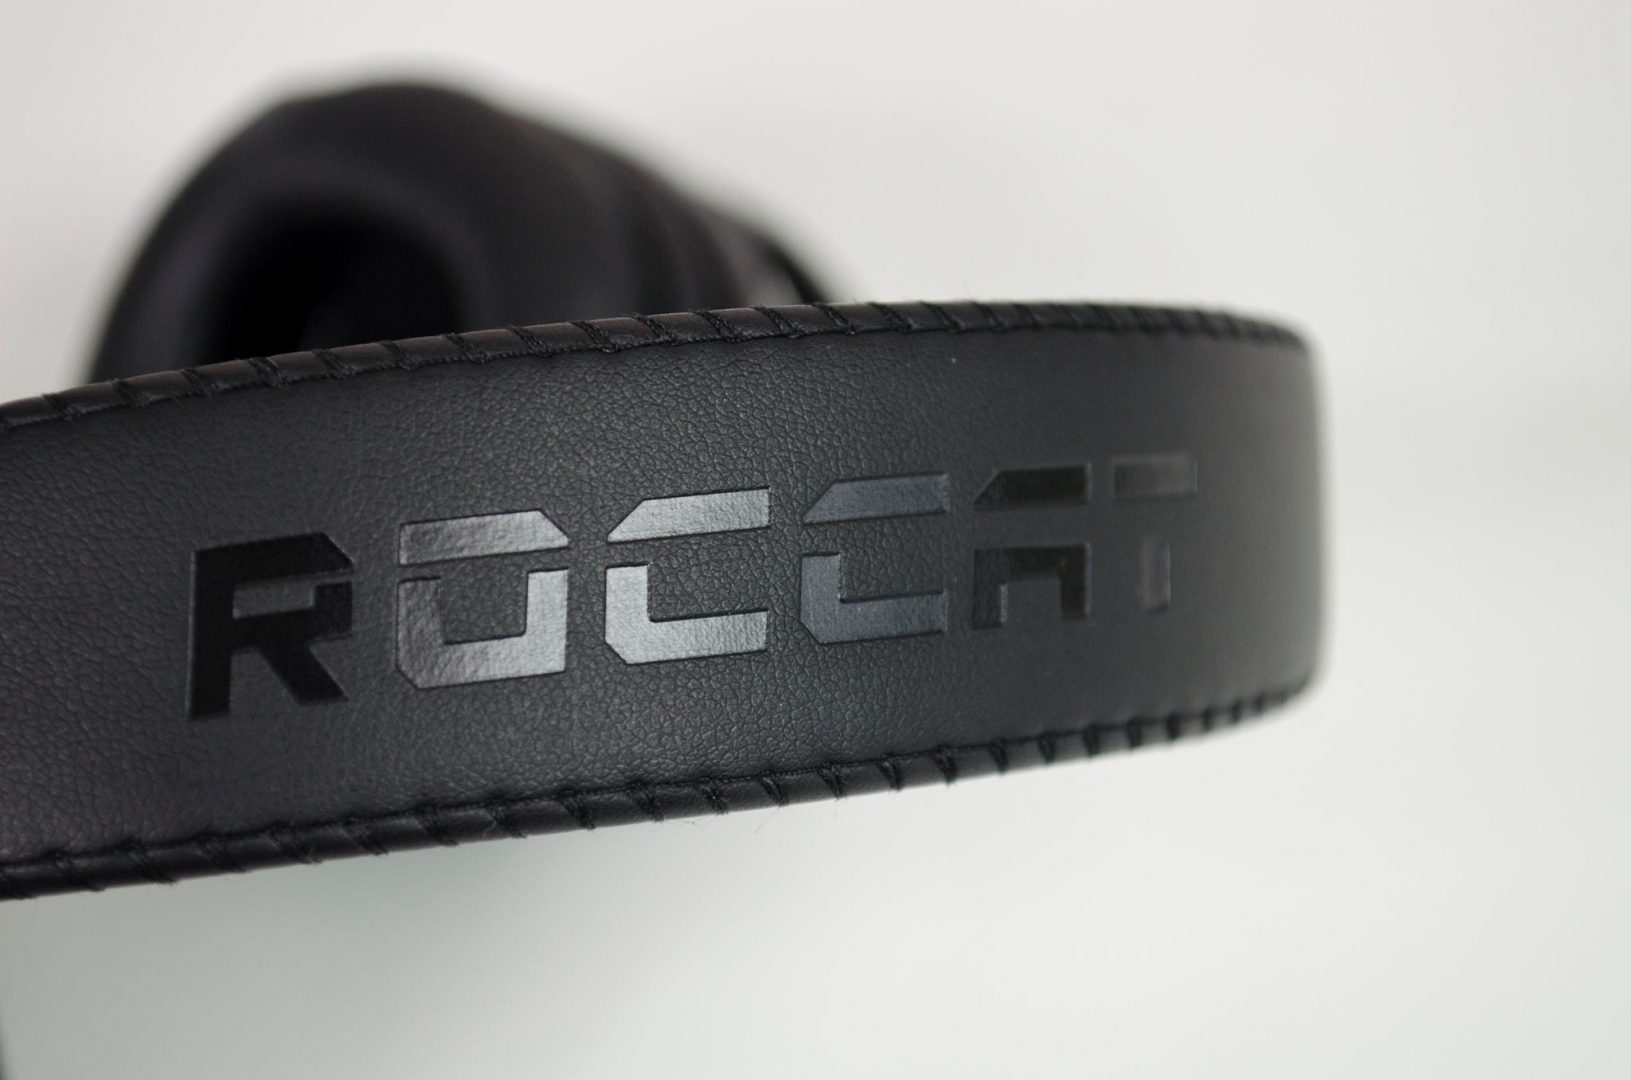 ROCCAT CROSS – MULTI-PLATFORM OVER-EAR STEREO GAMING HEADSET REVIEW